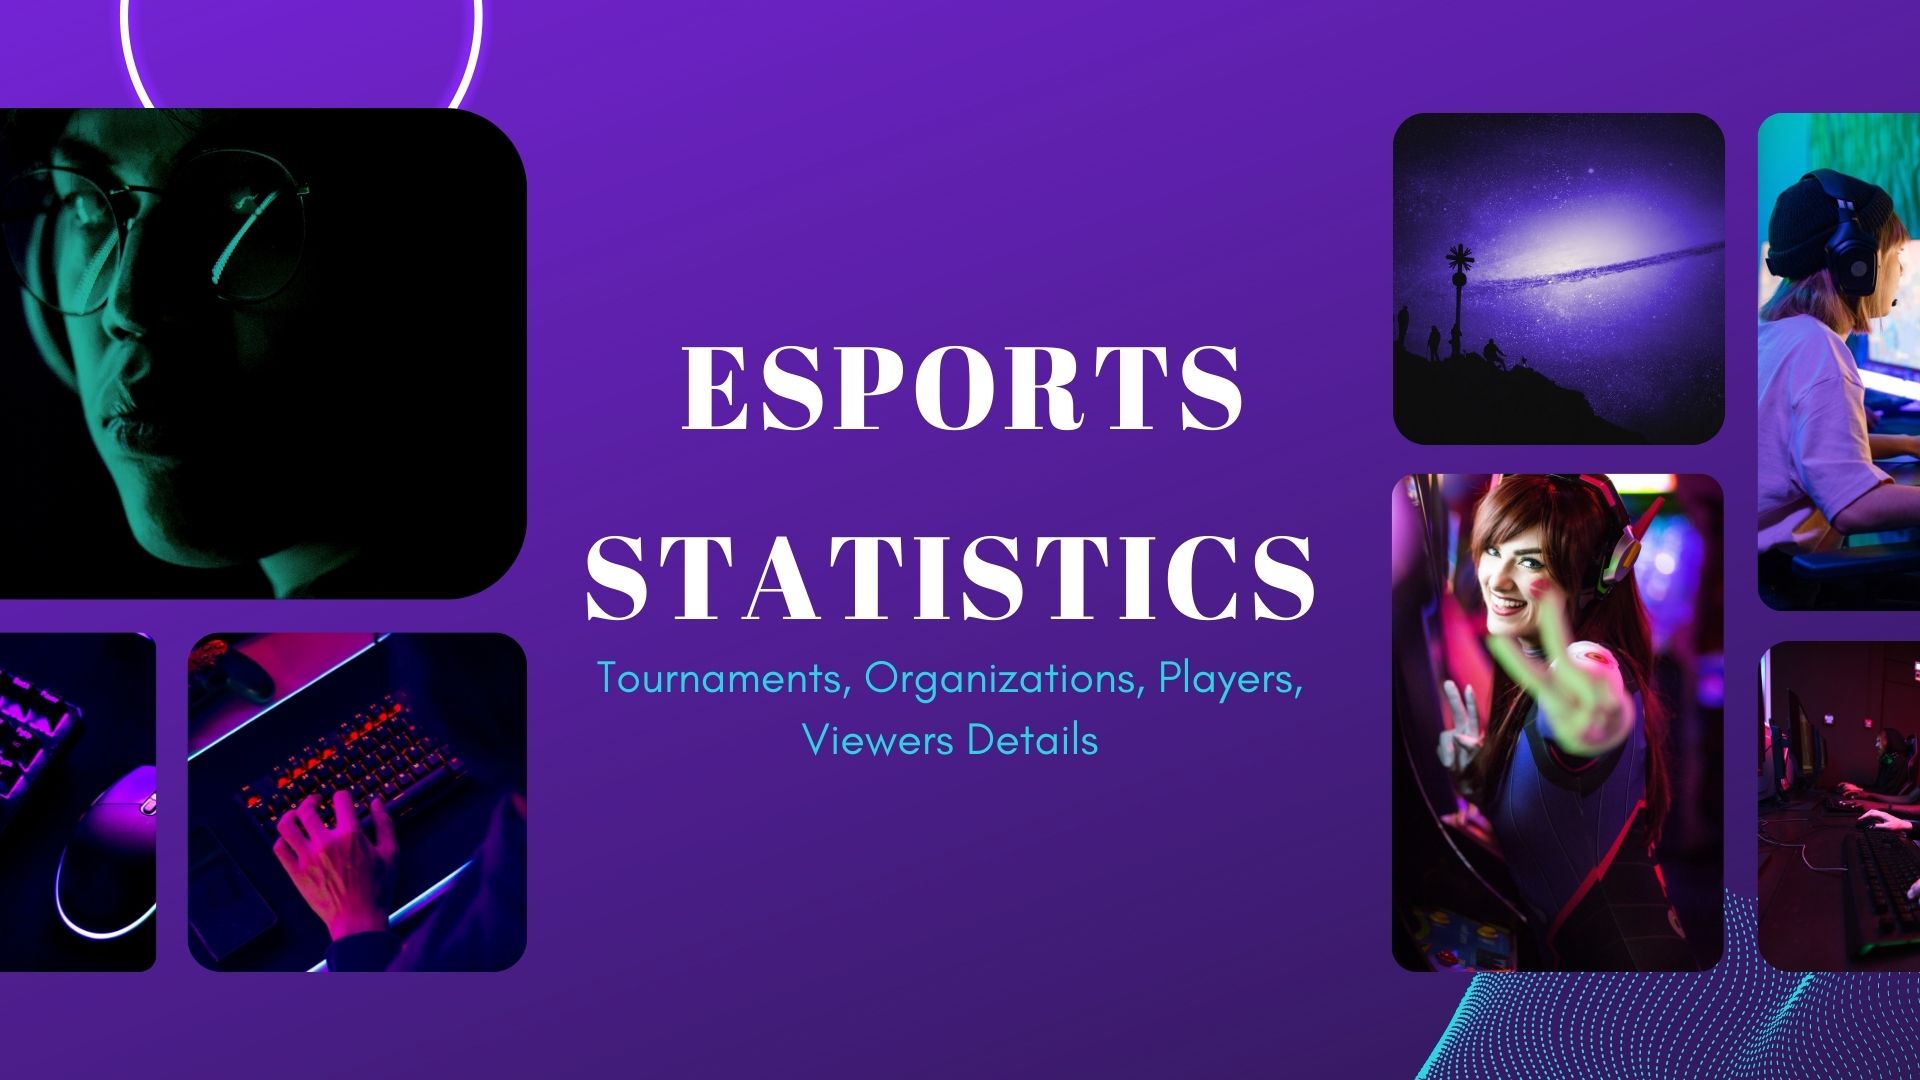 25+ Eye-Opening Esports Statistics In 2022 – Tournaments, Organizations, Players, Viewers Details